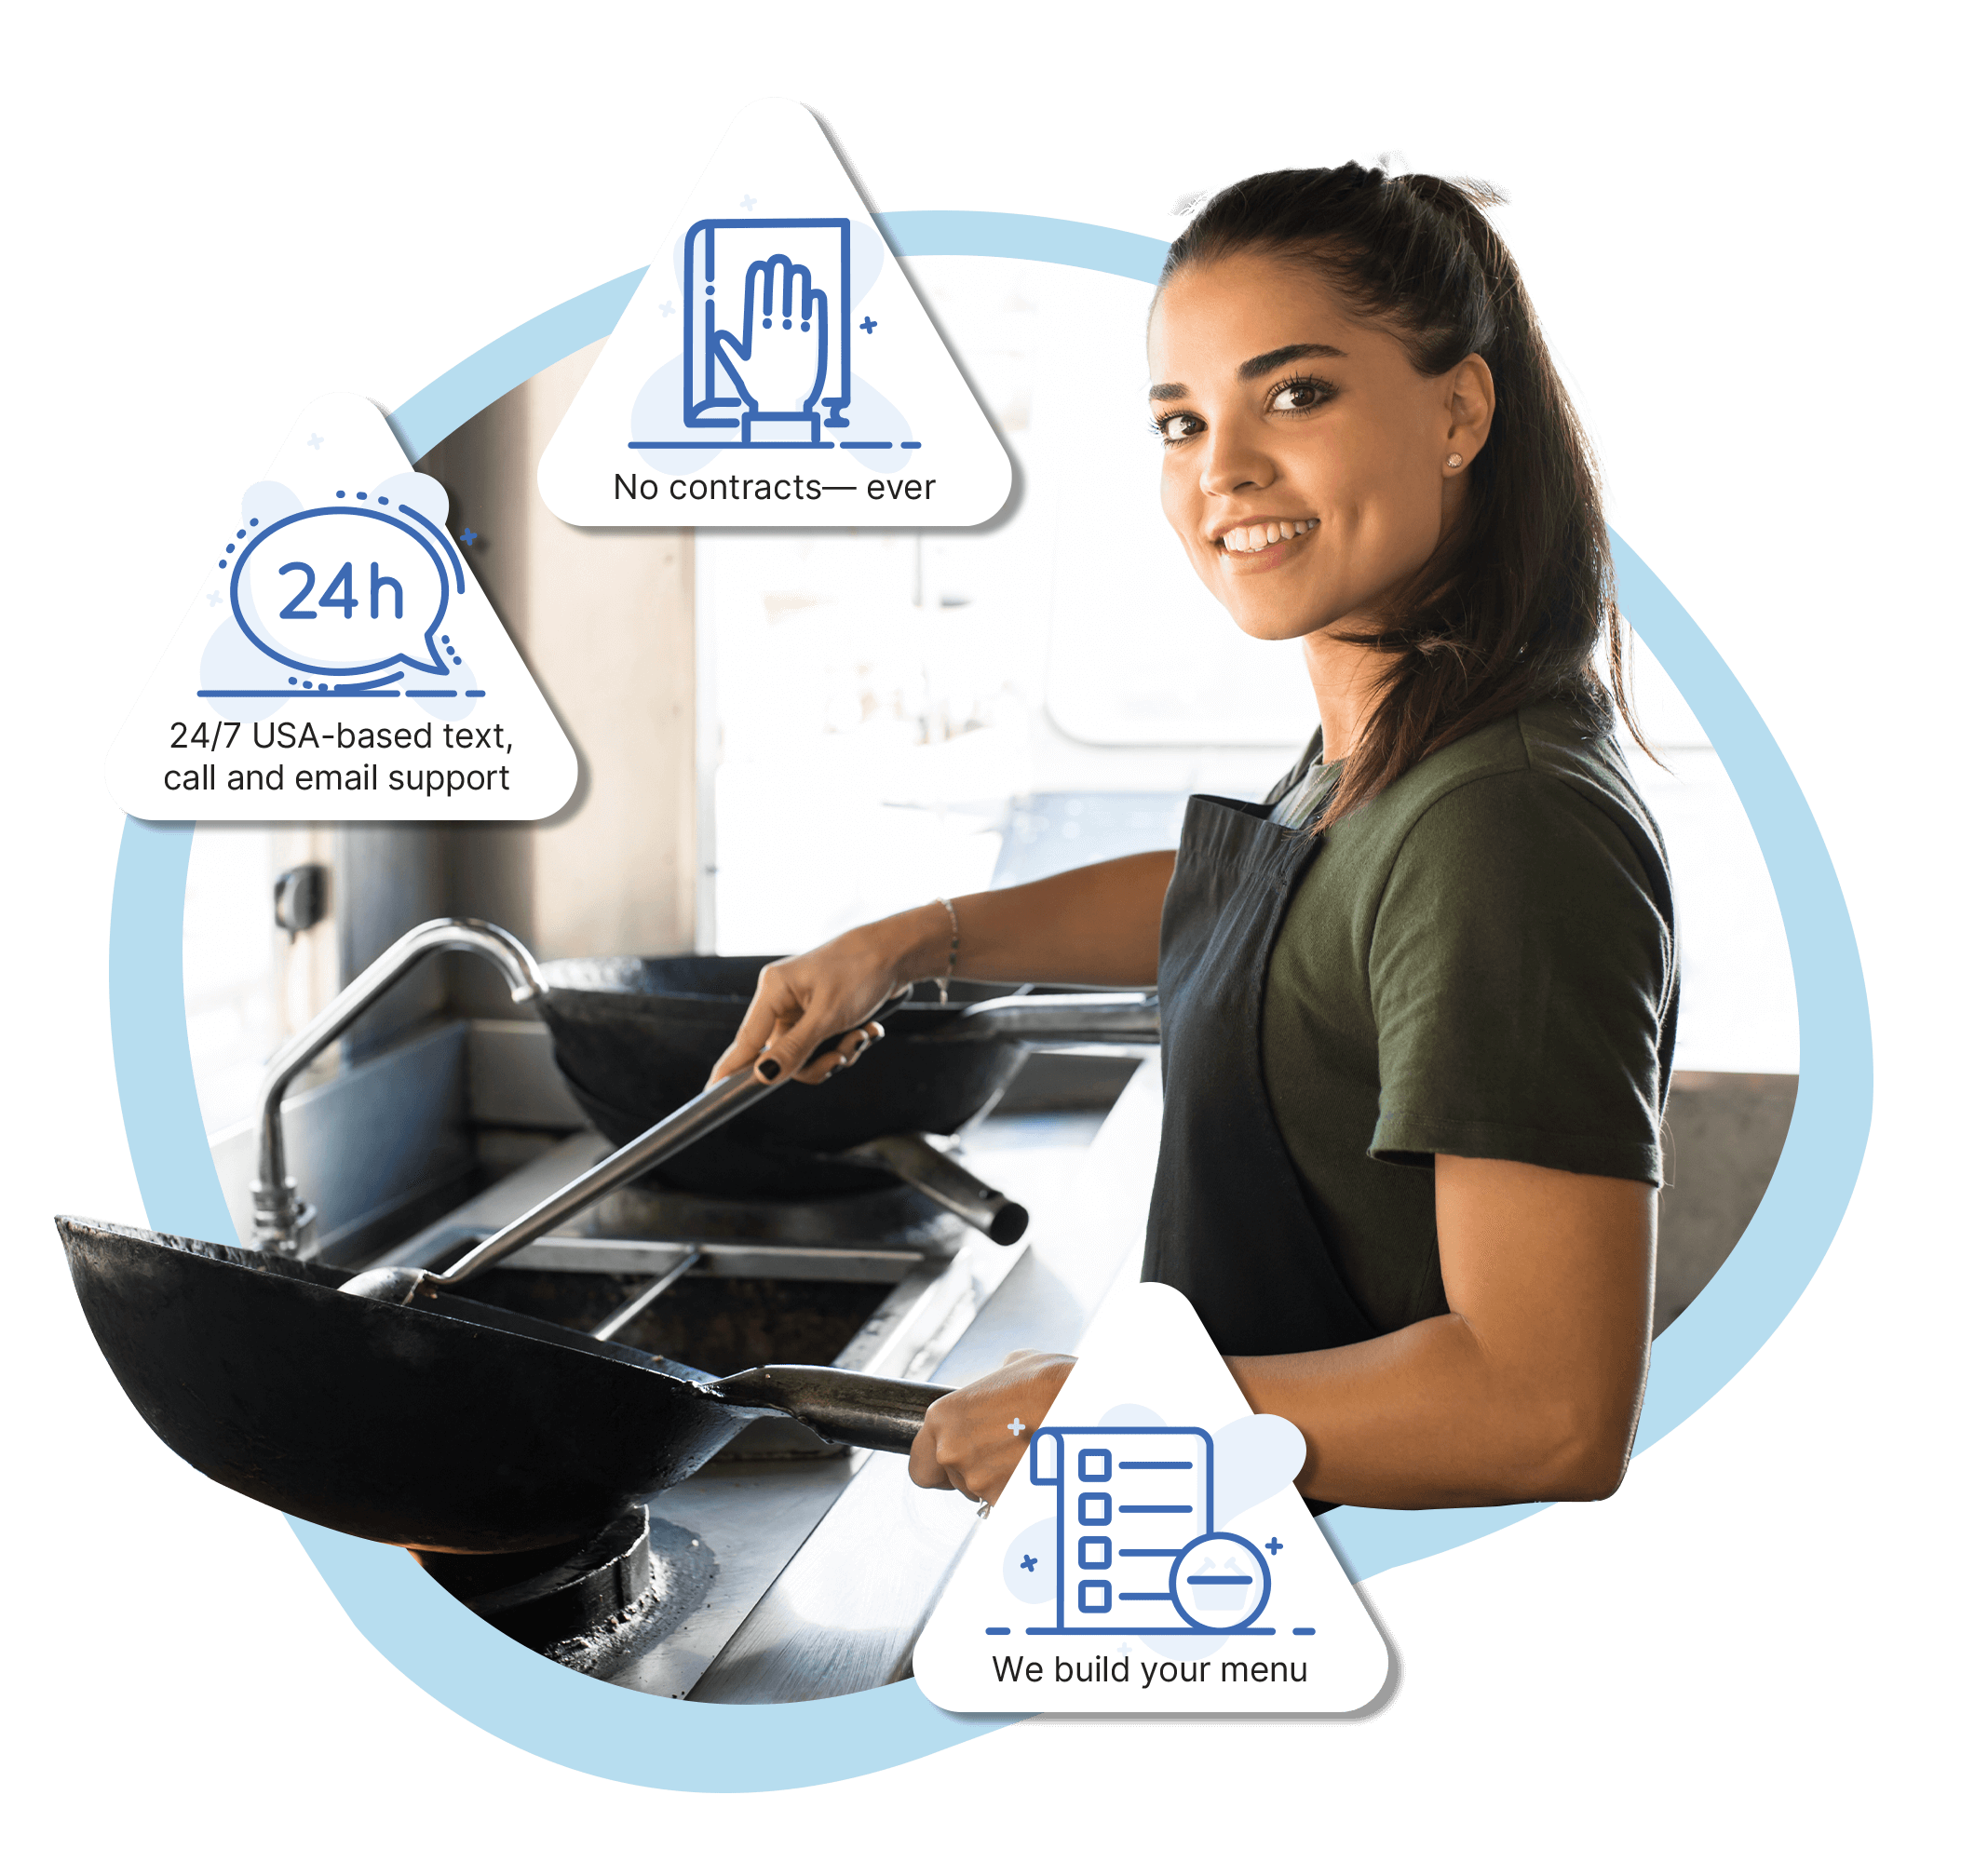 Young female food truck owner cooking up delicious food for her guests. Icons that show three of Table Needs' promises: no contracts--ever, 24/7 USA-based text, call and email support, and we build your menu.